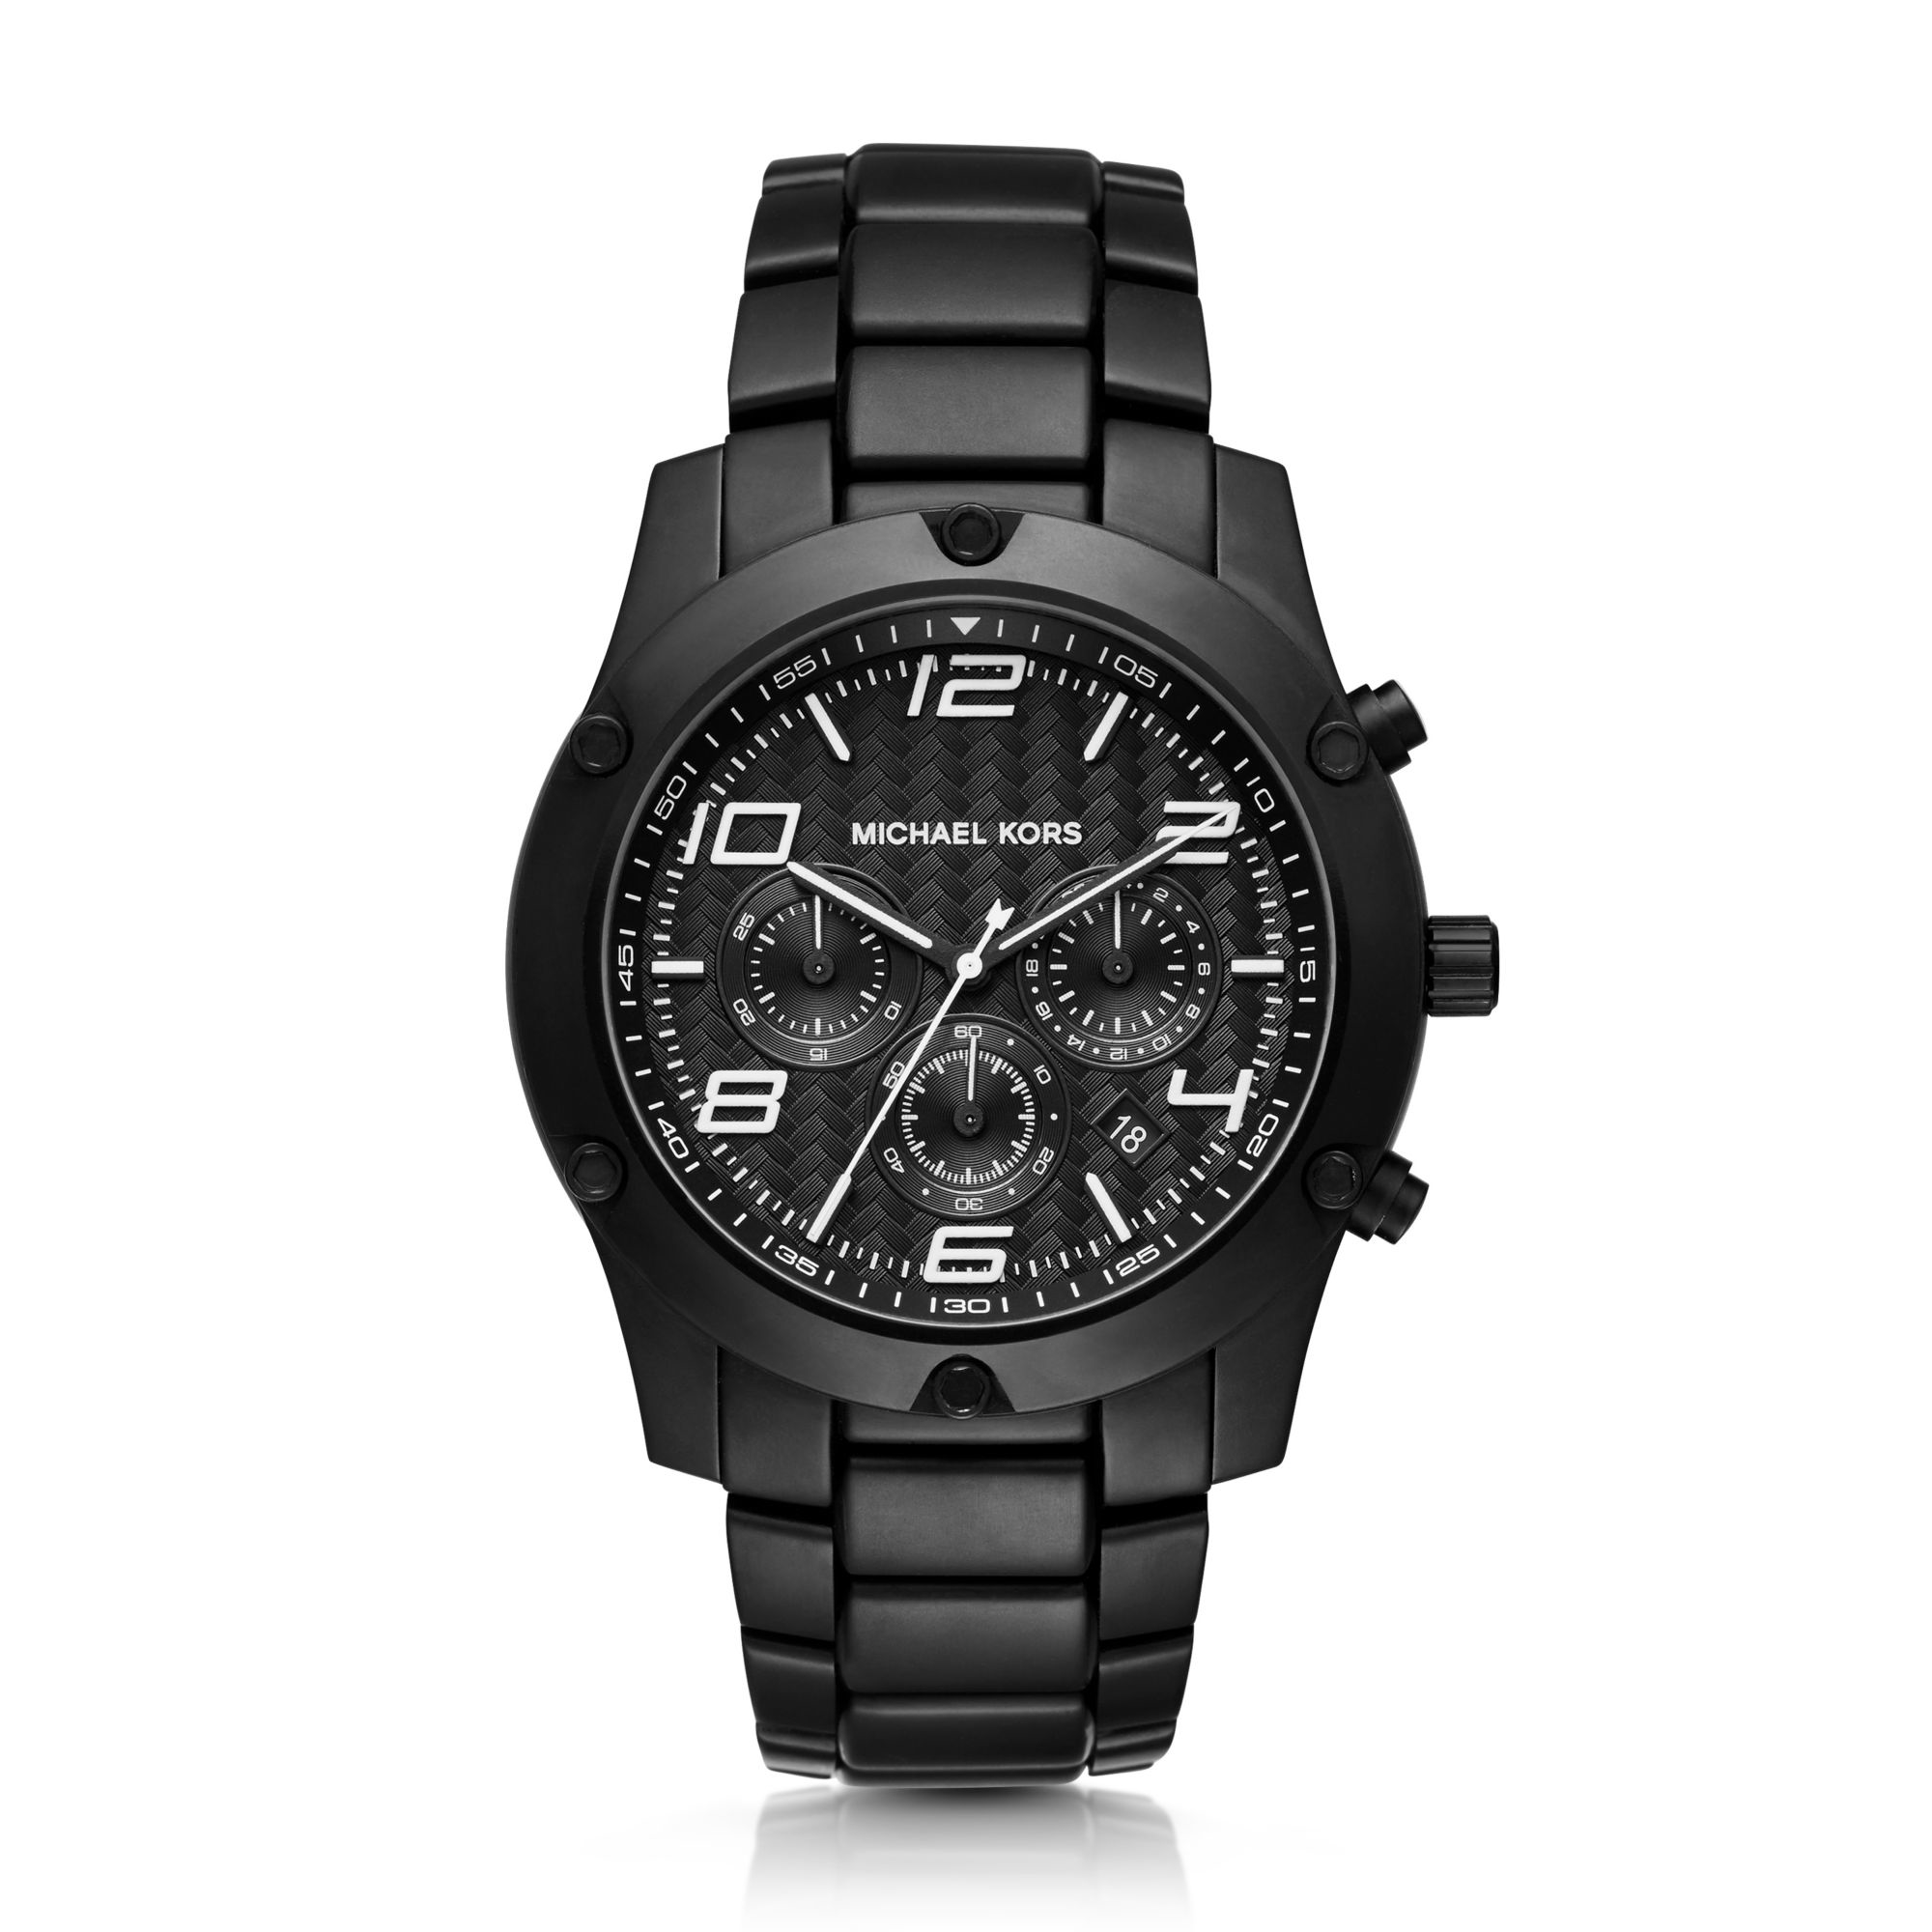 Lyst - Michael Kors Caine Chronograph Watch, 45mm in Black for Men